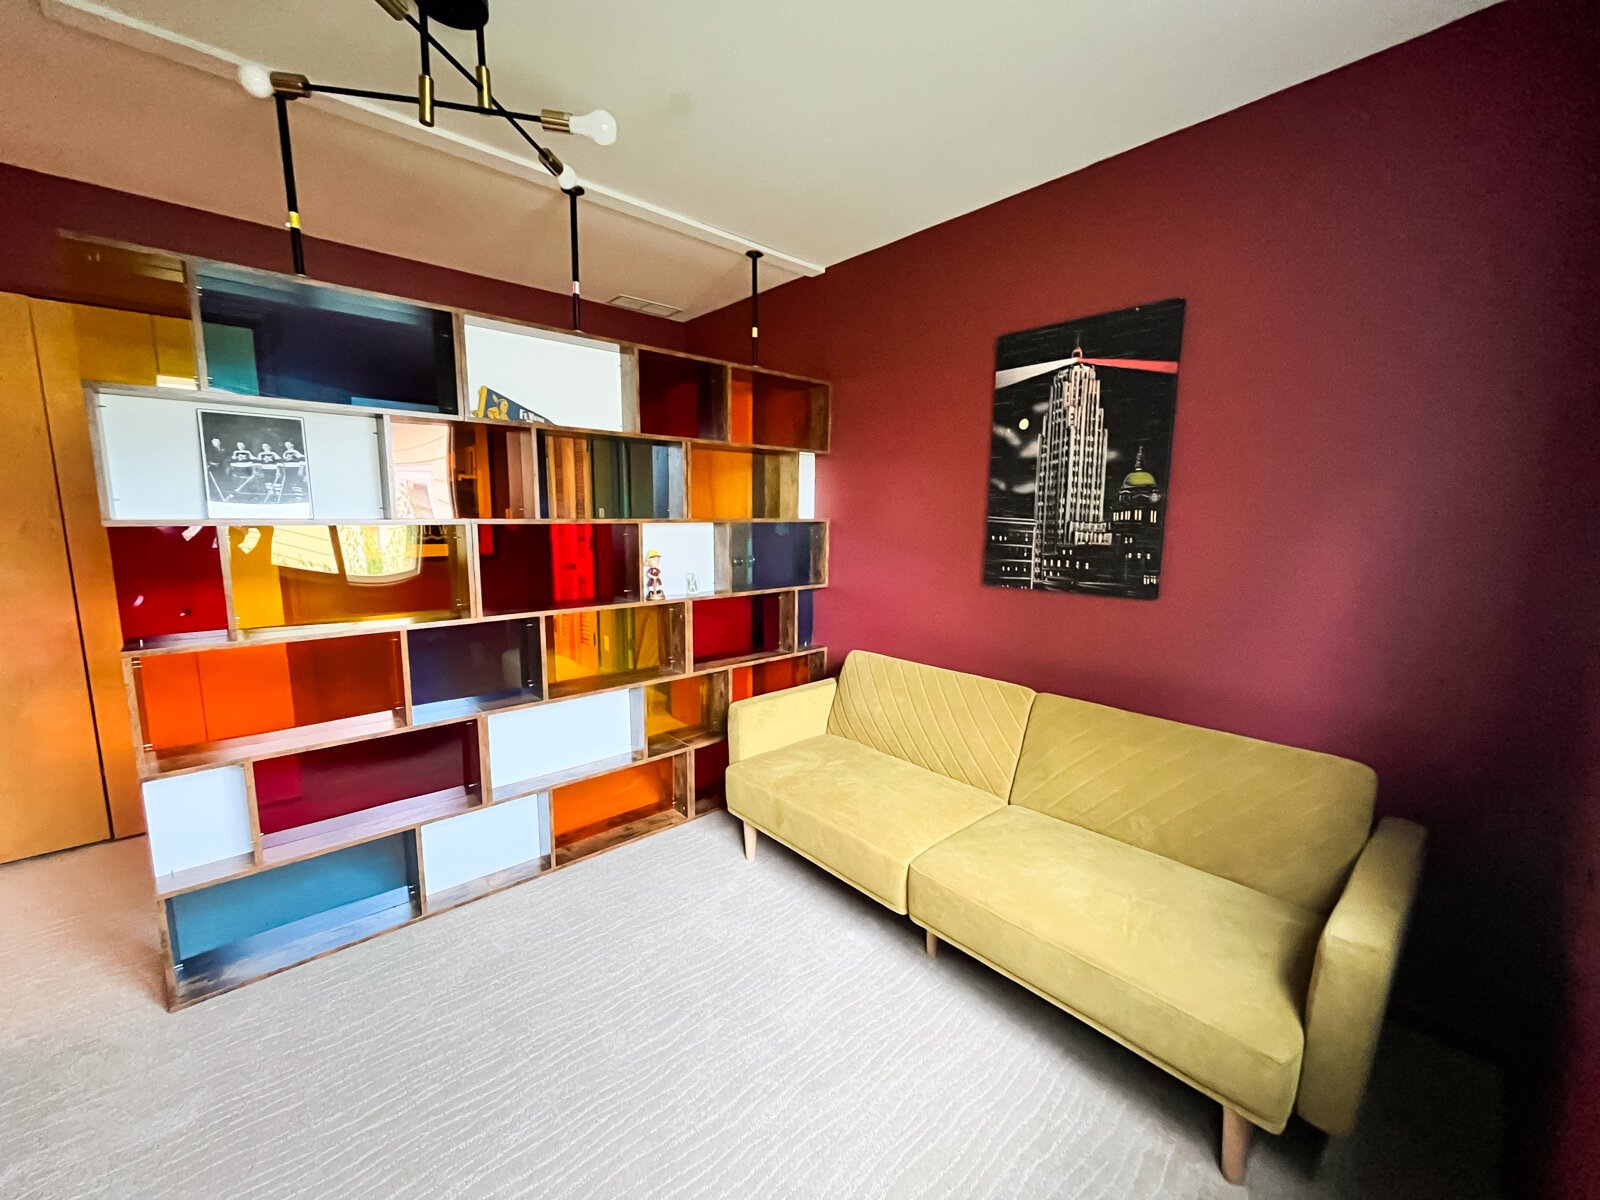 The office area features a colorful room dividing wall.